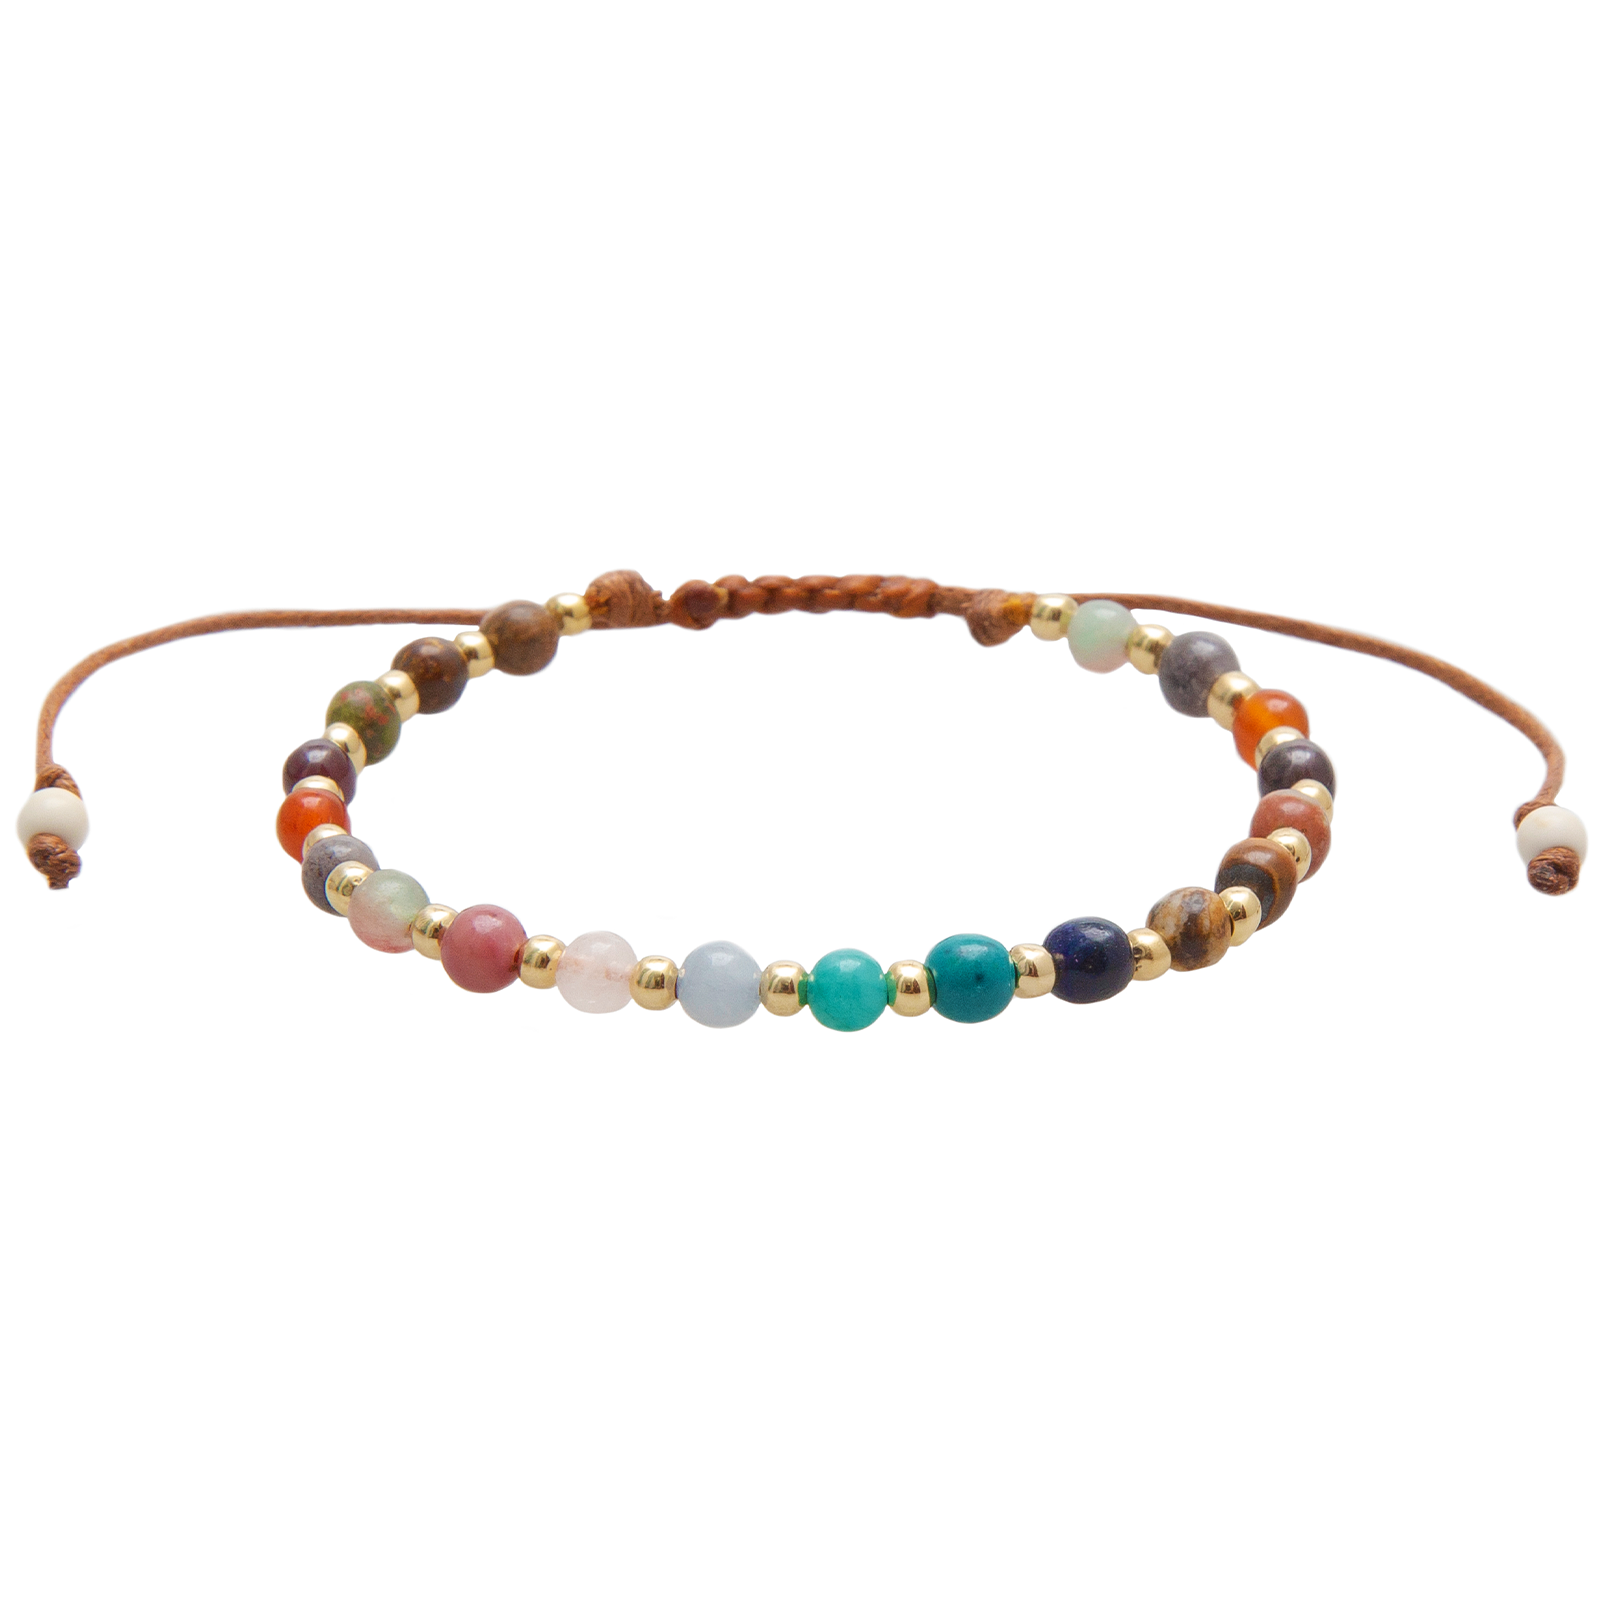 4mm multicolor stone and gold bead healing bracelet with cotton pull through closure